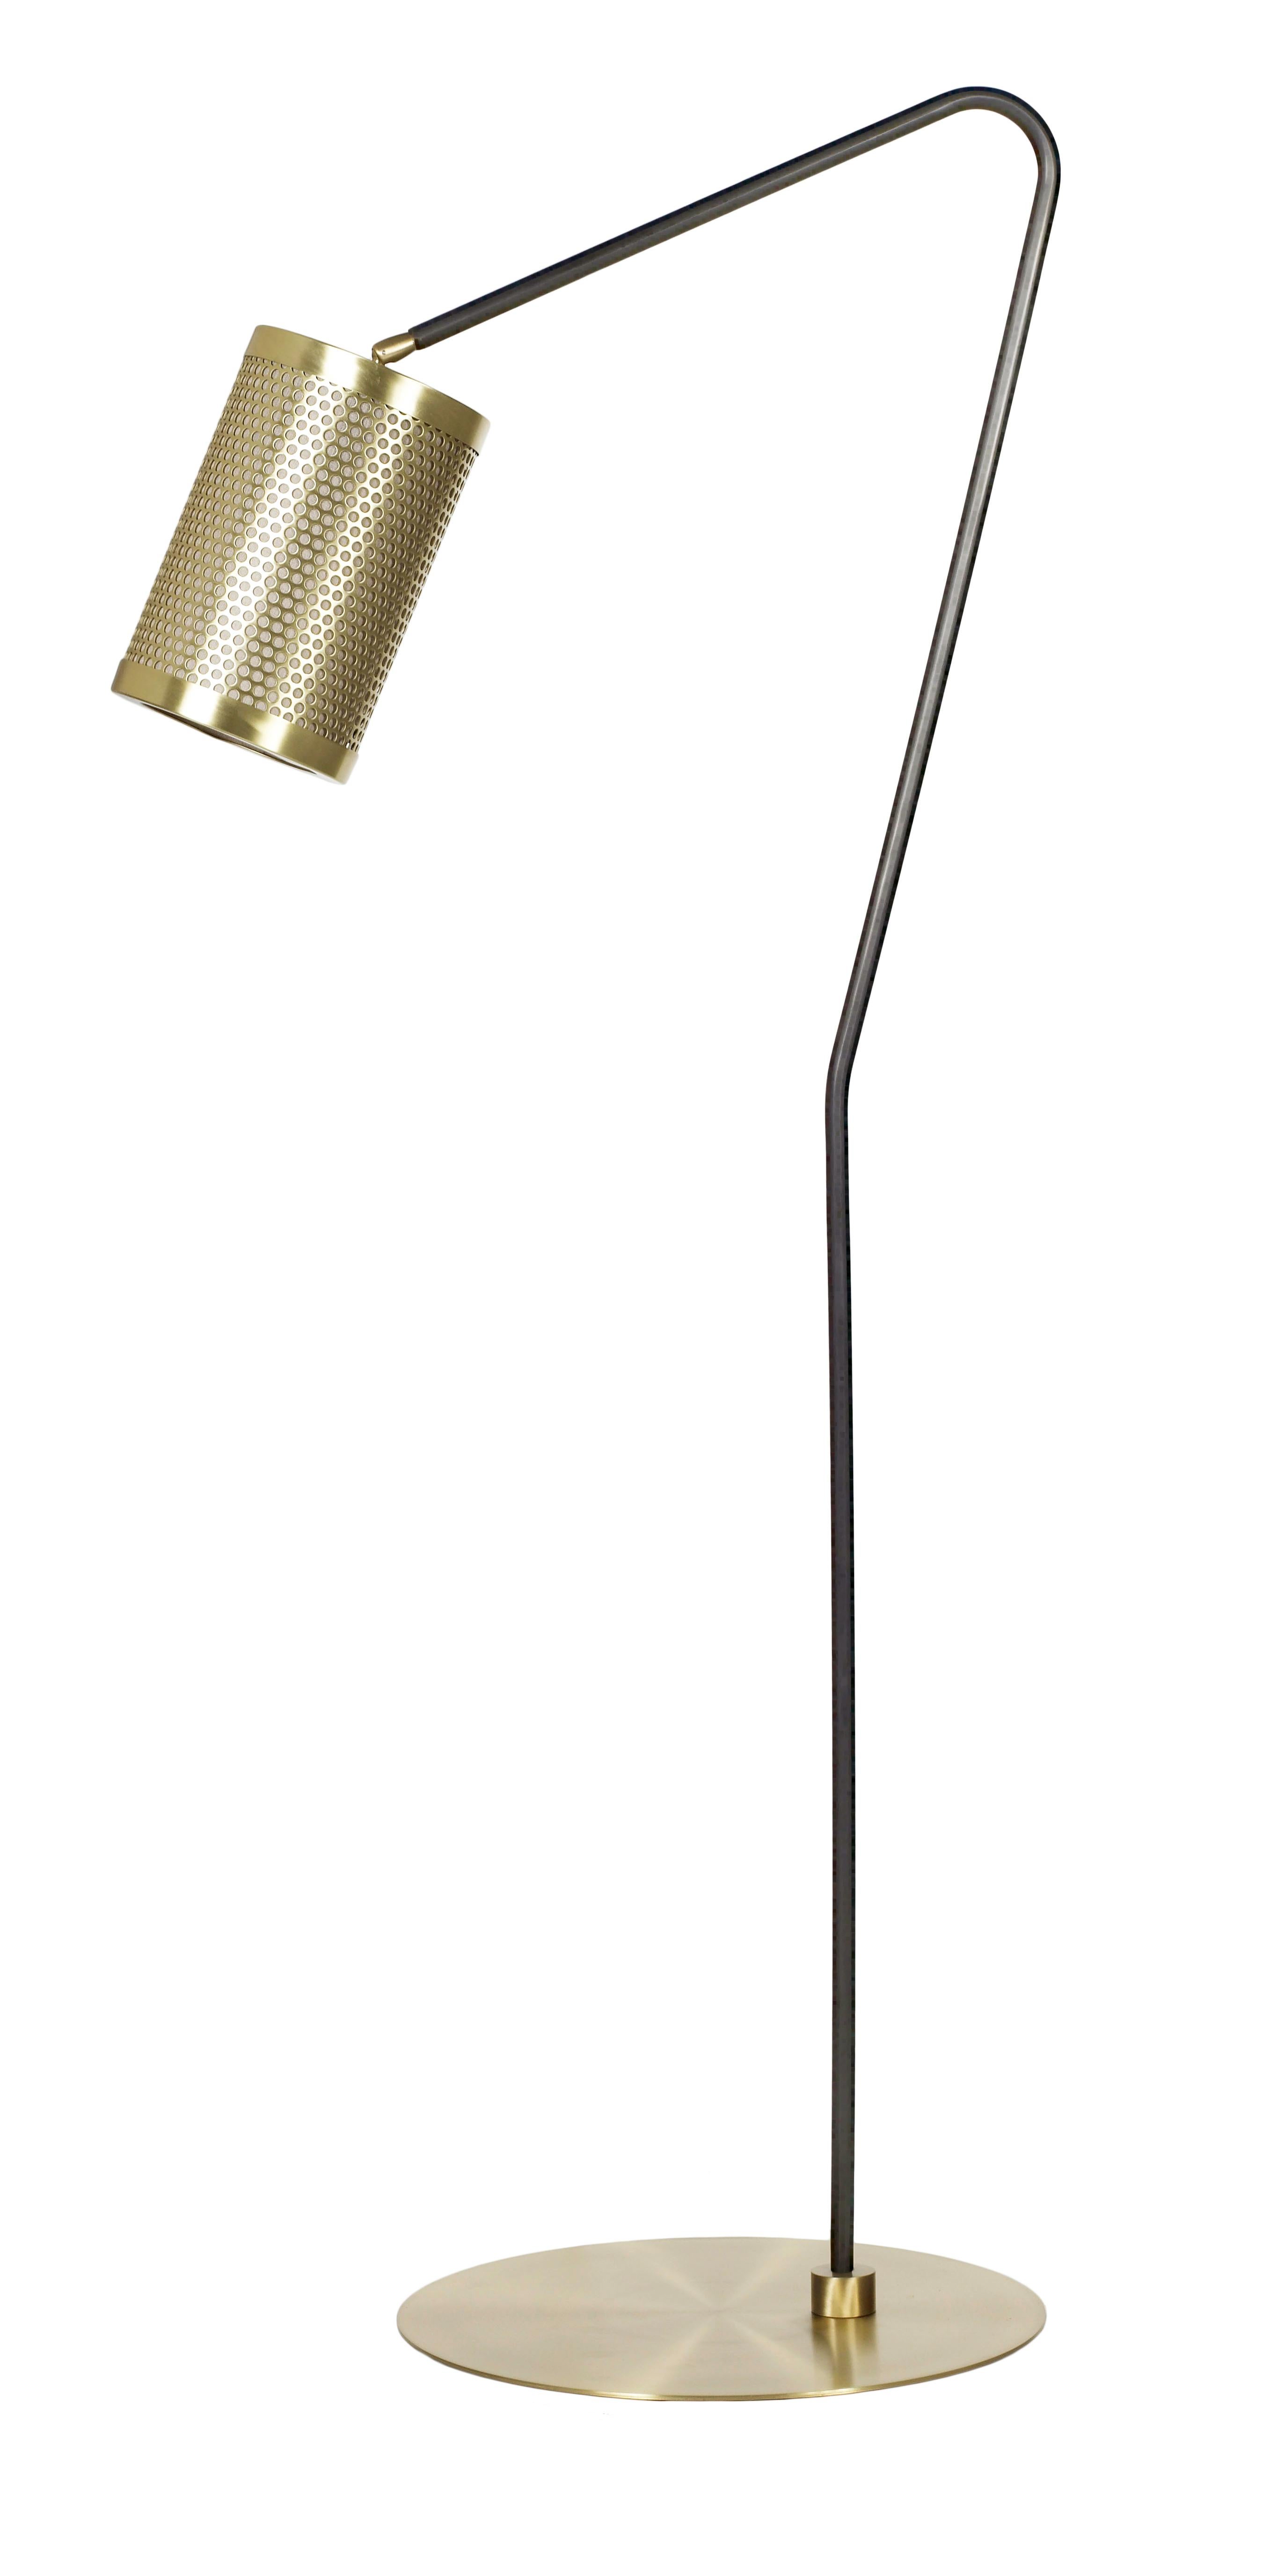 Pierre floor lamp by CTO Lighting
Materials: Bronze with satin brass base, satin brass perforated drum shade
Dimensions: H 141 x W 58 cm 

All our lamps can be wired according to each country. If sold to the USA it will be wired for the USA for